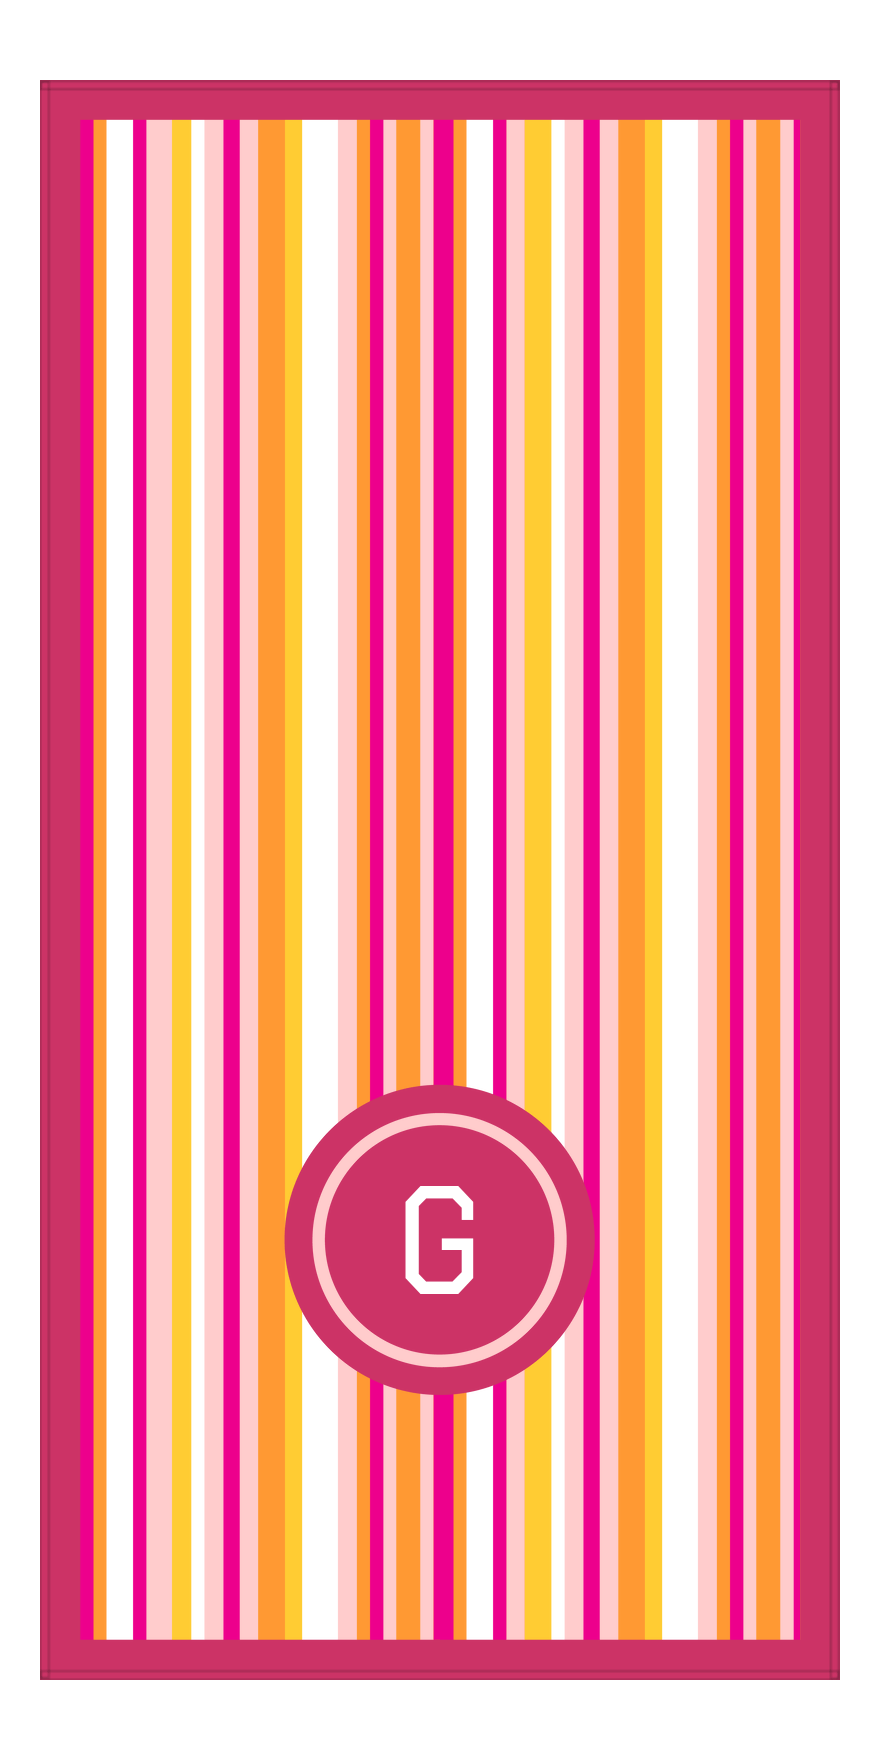 Personalized 5 Color Stripes 2 Repeat Beach Towel - Vertical - Pink and Orange - Circle Off Center Frame - Front View